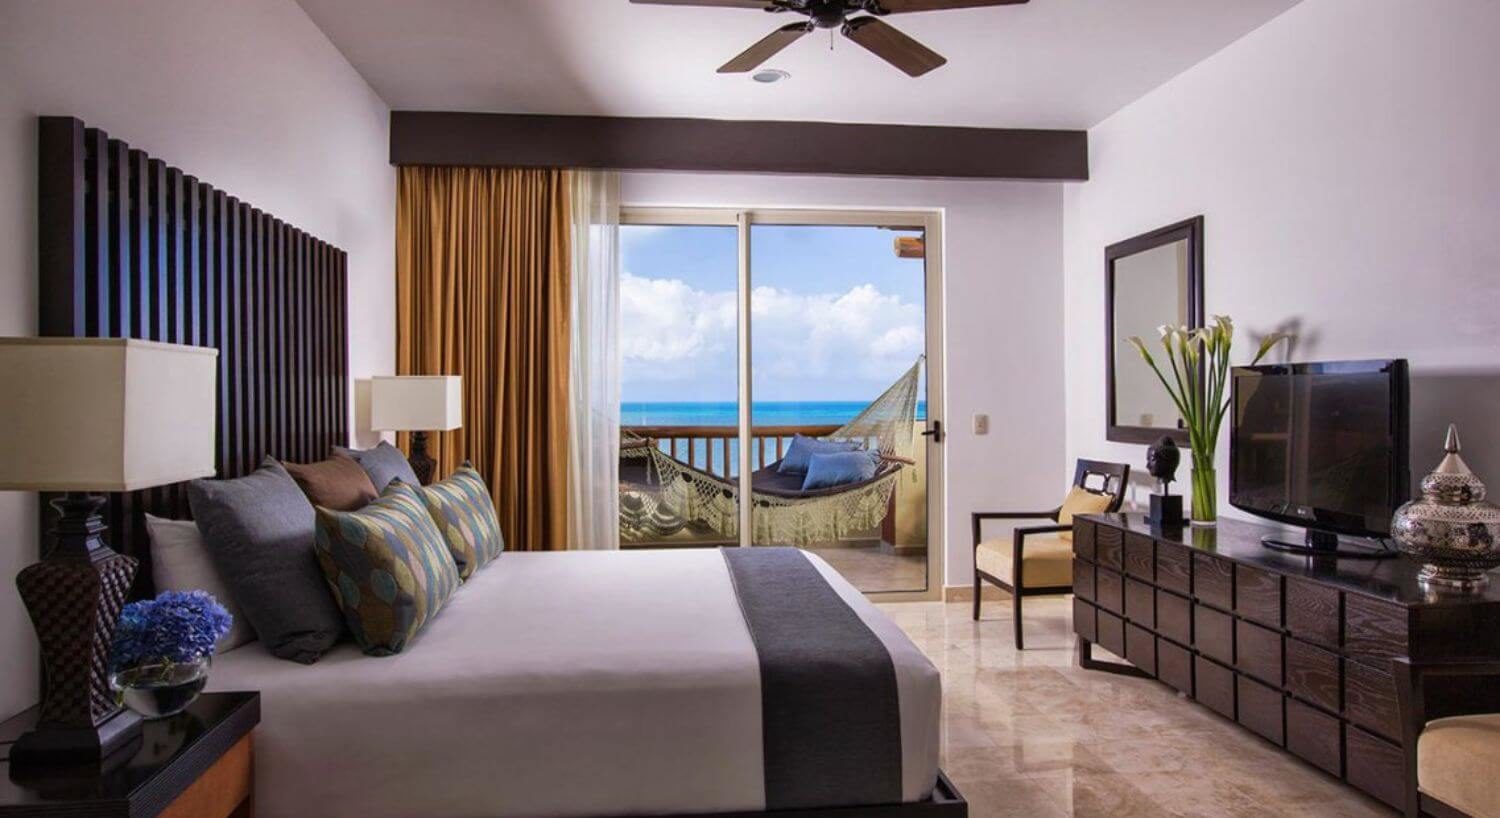 A bedroom with a King bed with white, grey bedding with multi colored throw pillows, nightstands and lamps on either side of the bed, a rich deep wood dresser and flat screen TV on the other side of the bed, and sliding doors leading out to a balcony with an oversized hammock and turquoise ocean views.